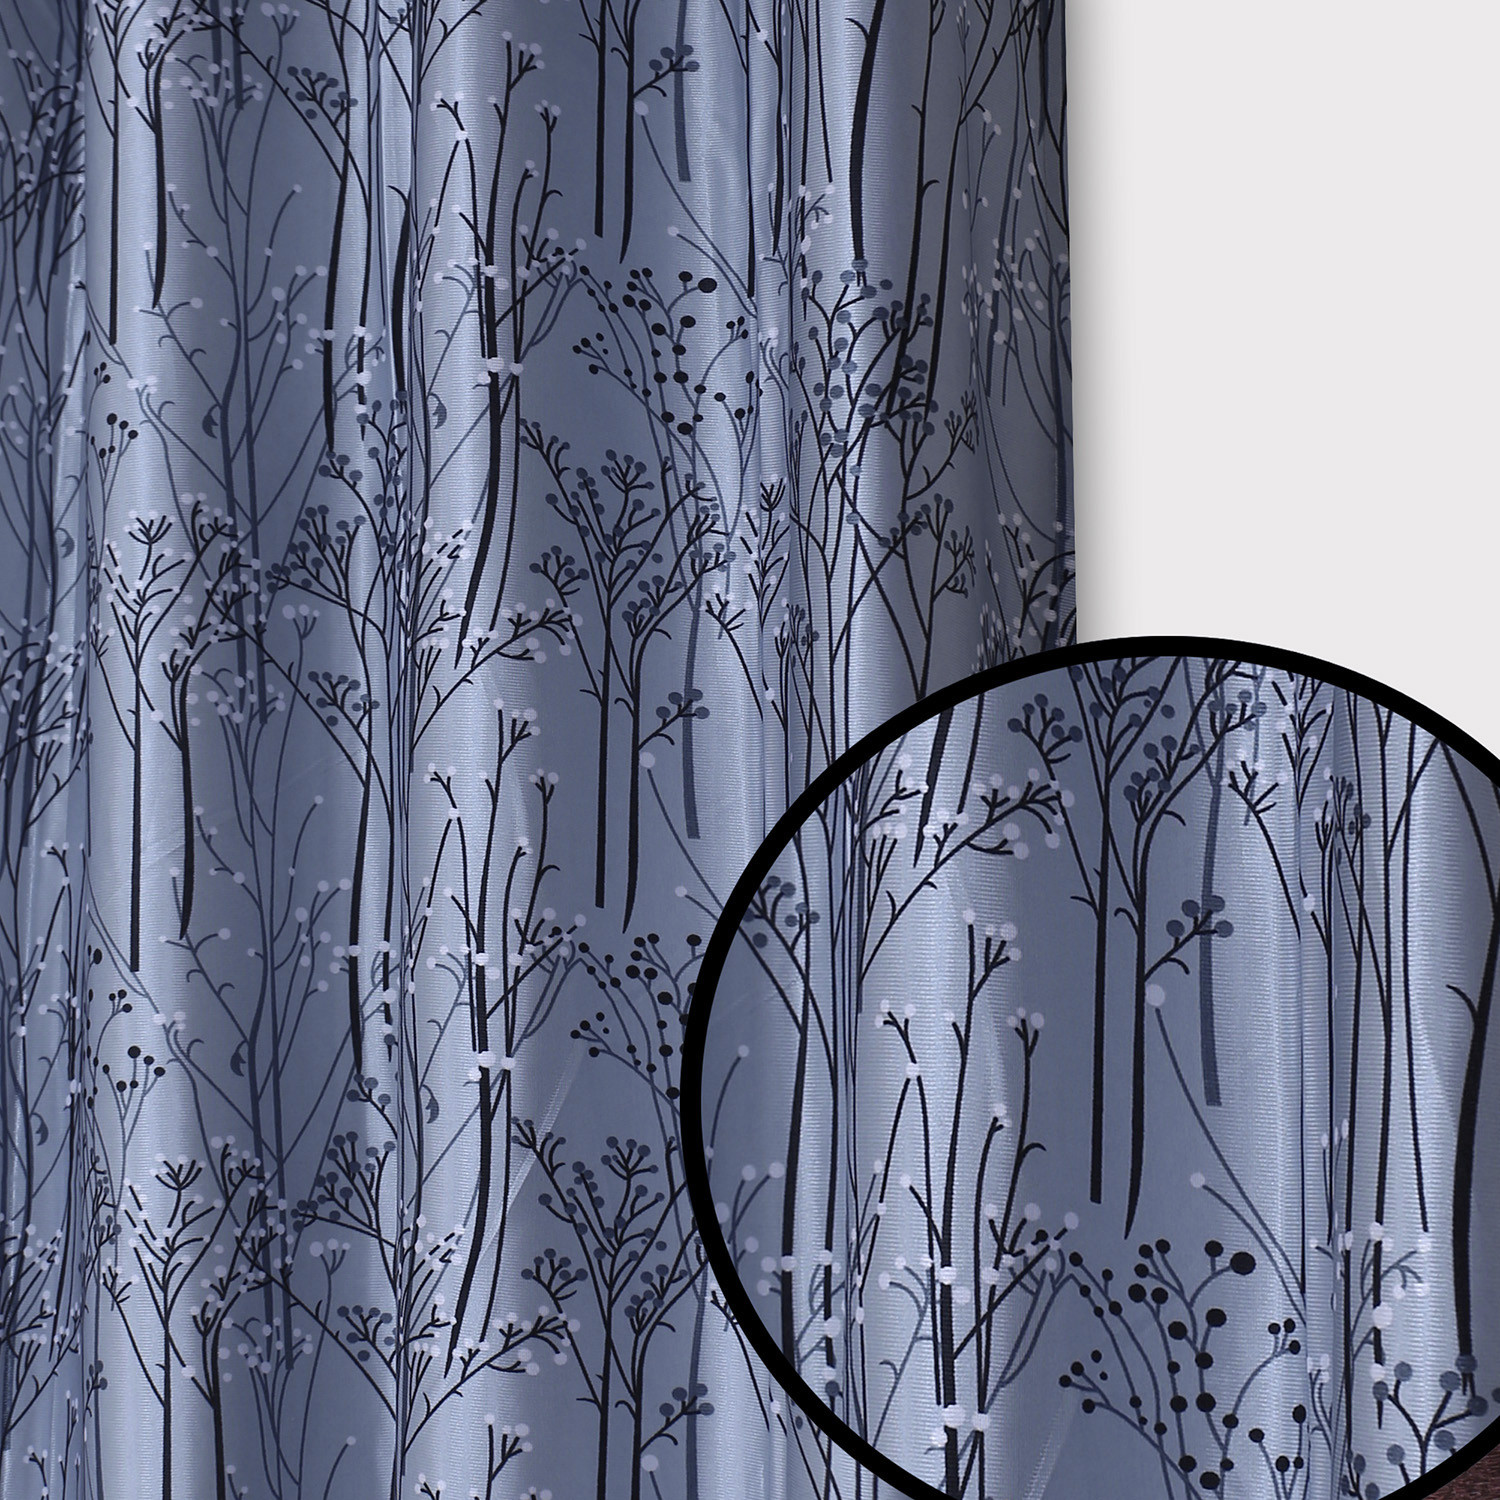 Kuber Industries Polyester Decorative 7 Feet Door Curtain|Tree Branches Print Blackout Drapes Curatin With 8 Eyelet For Home & Office (Gray)